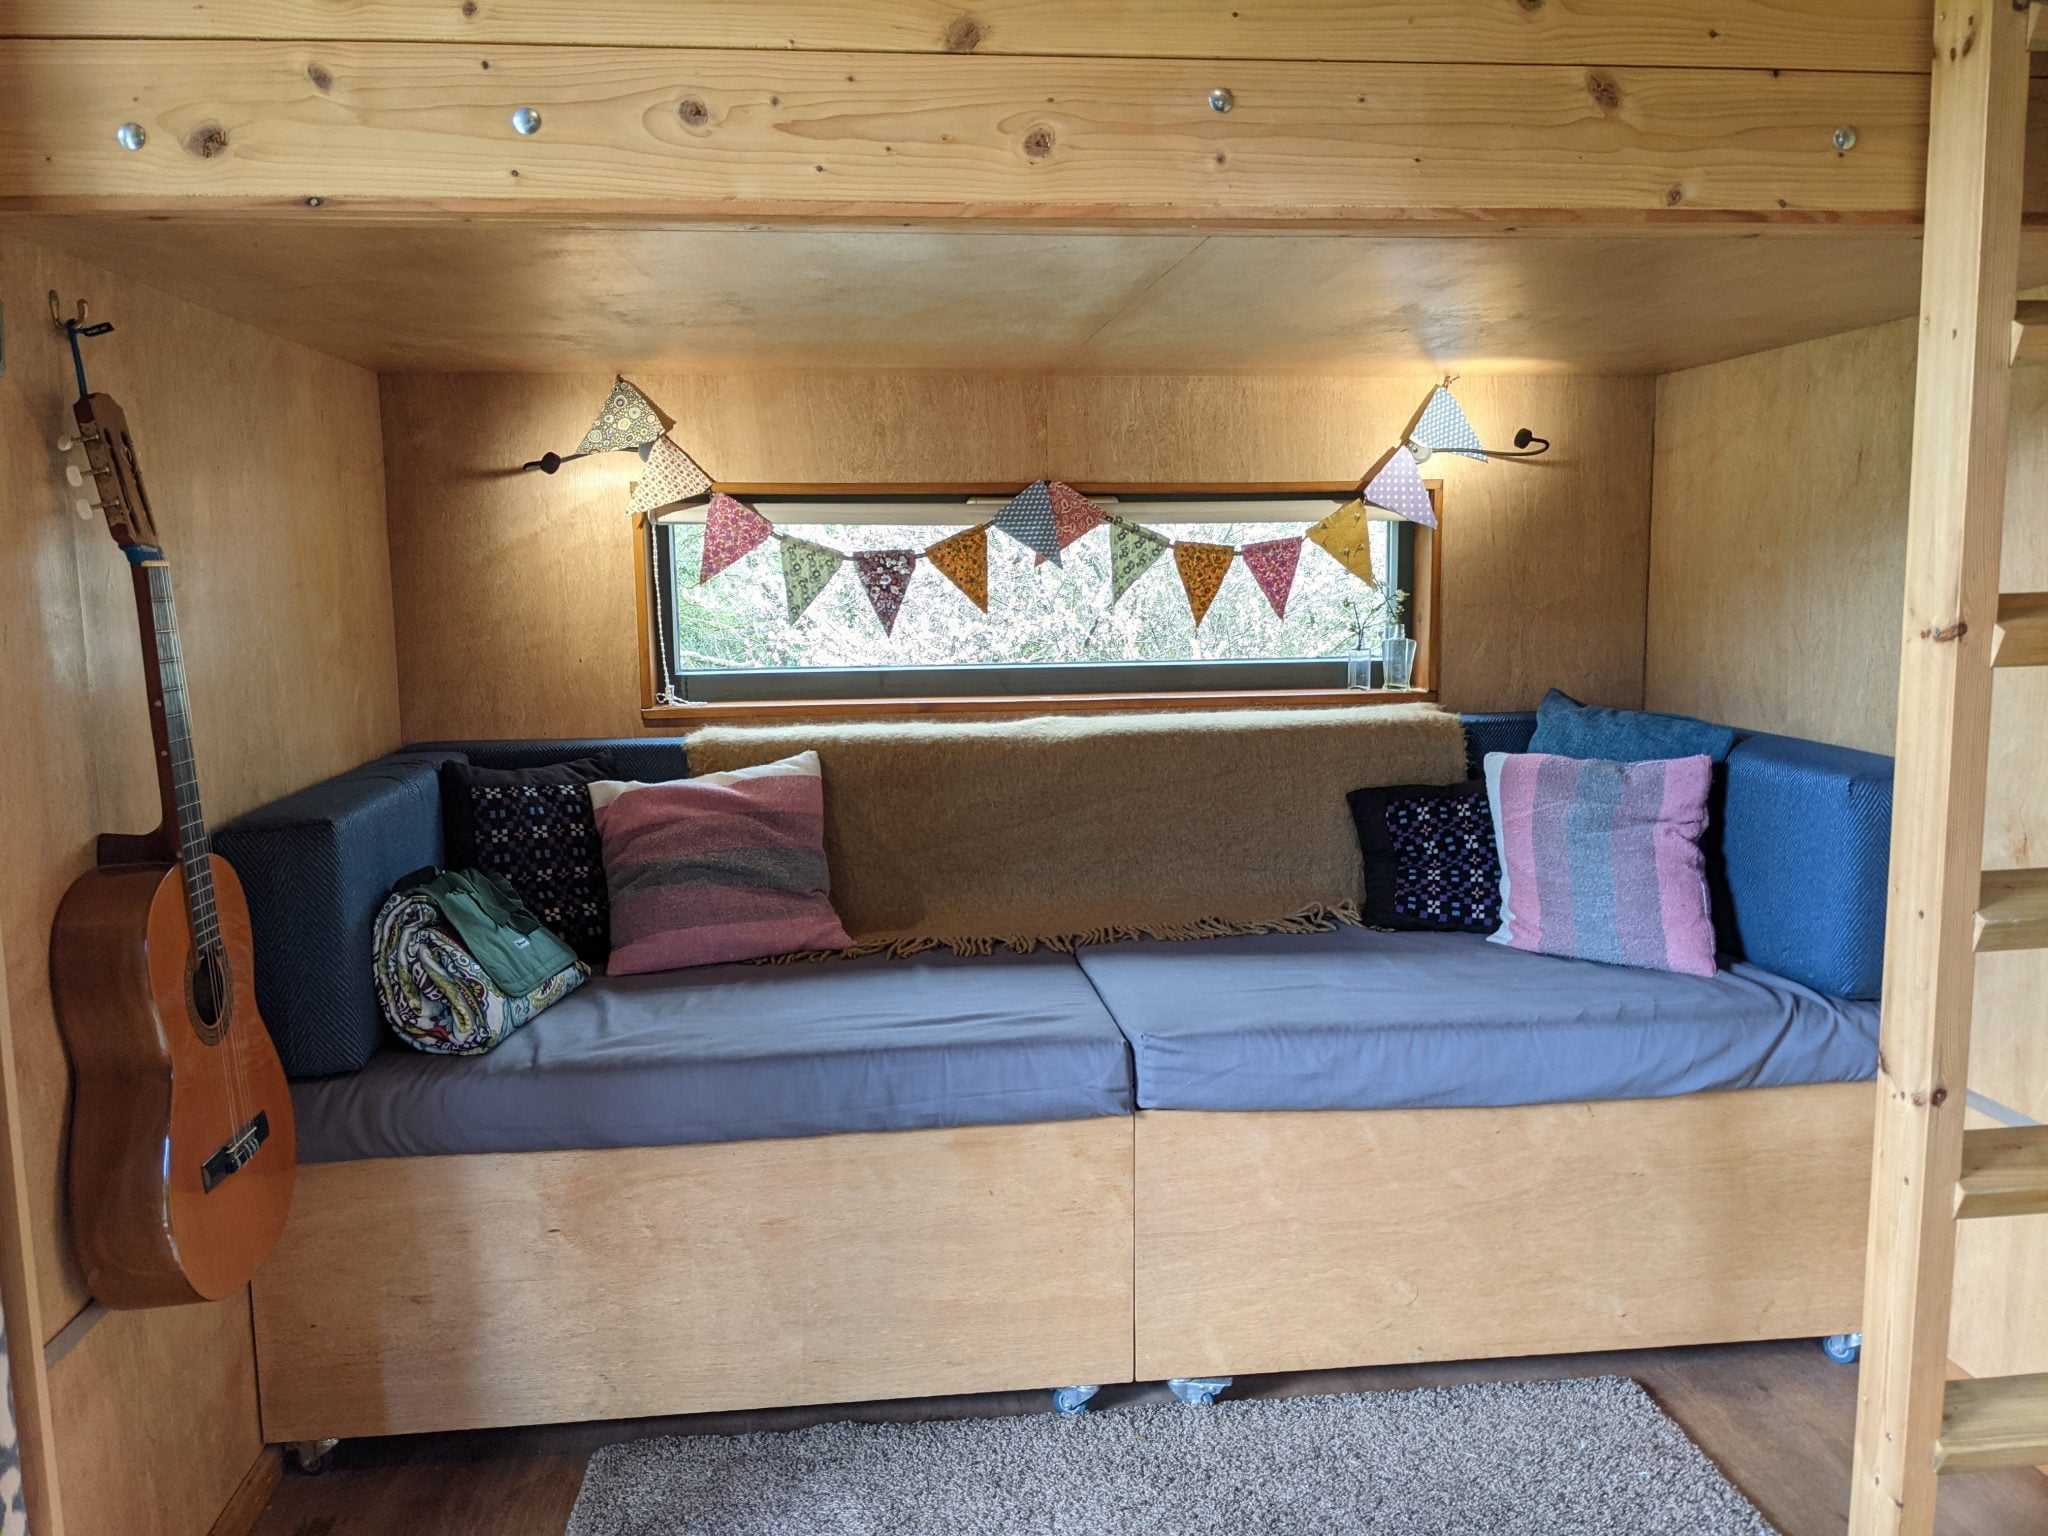 Seating area that converts into a kids bed underneath the platform double bed access by the ladder in the right of the image.